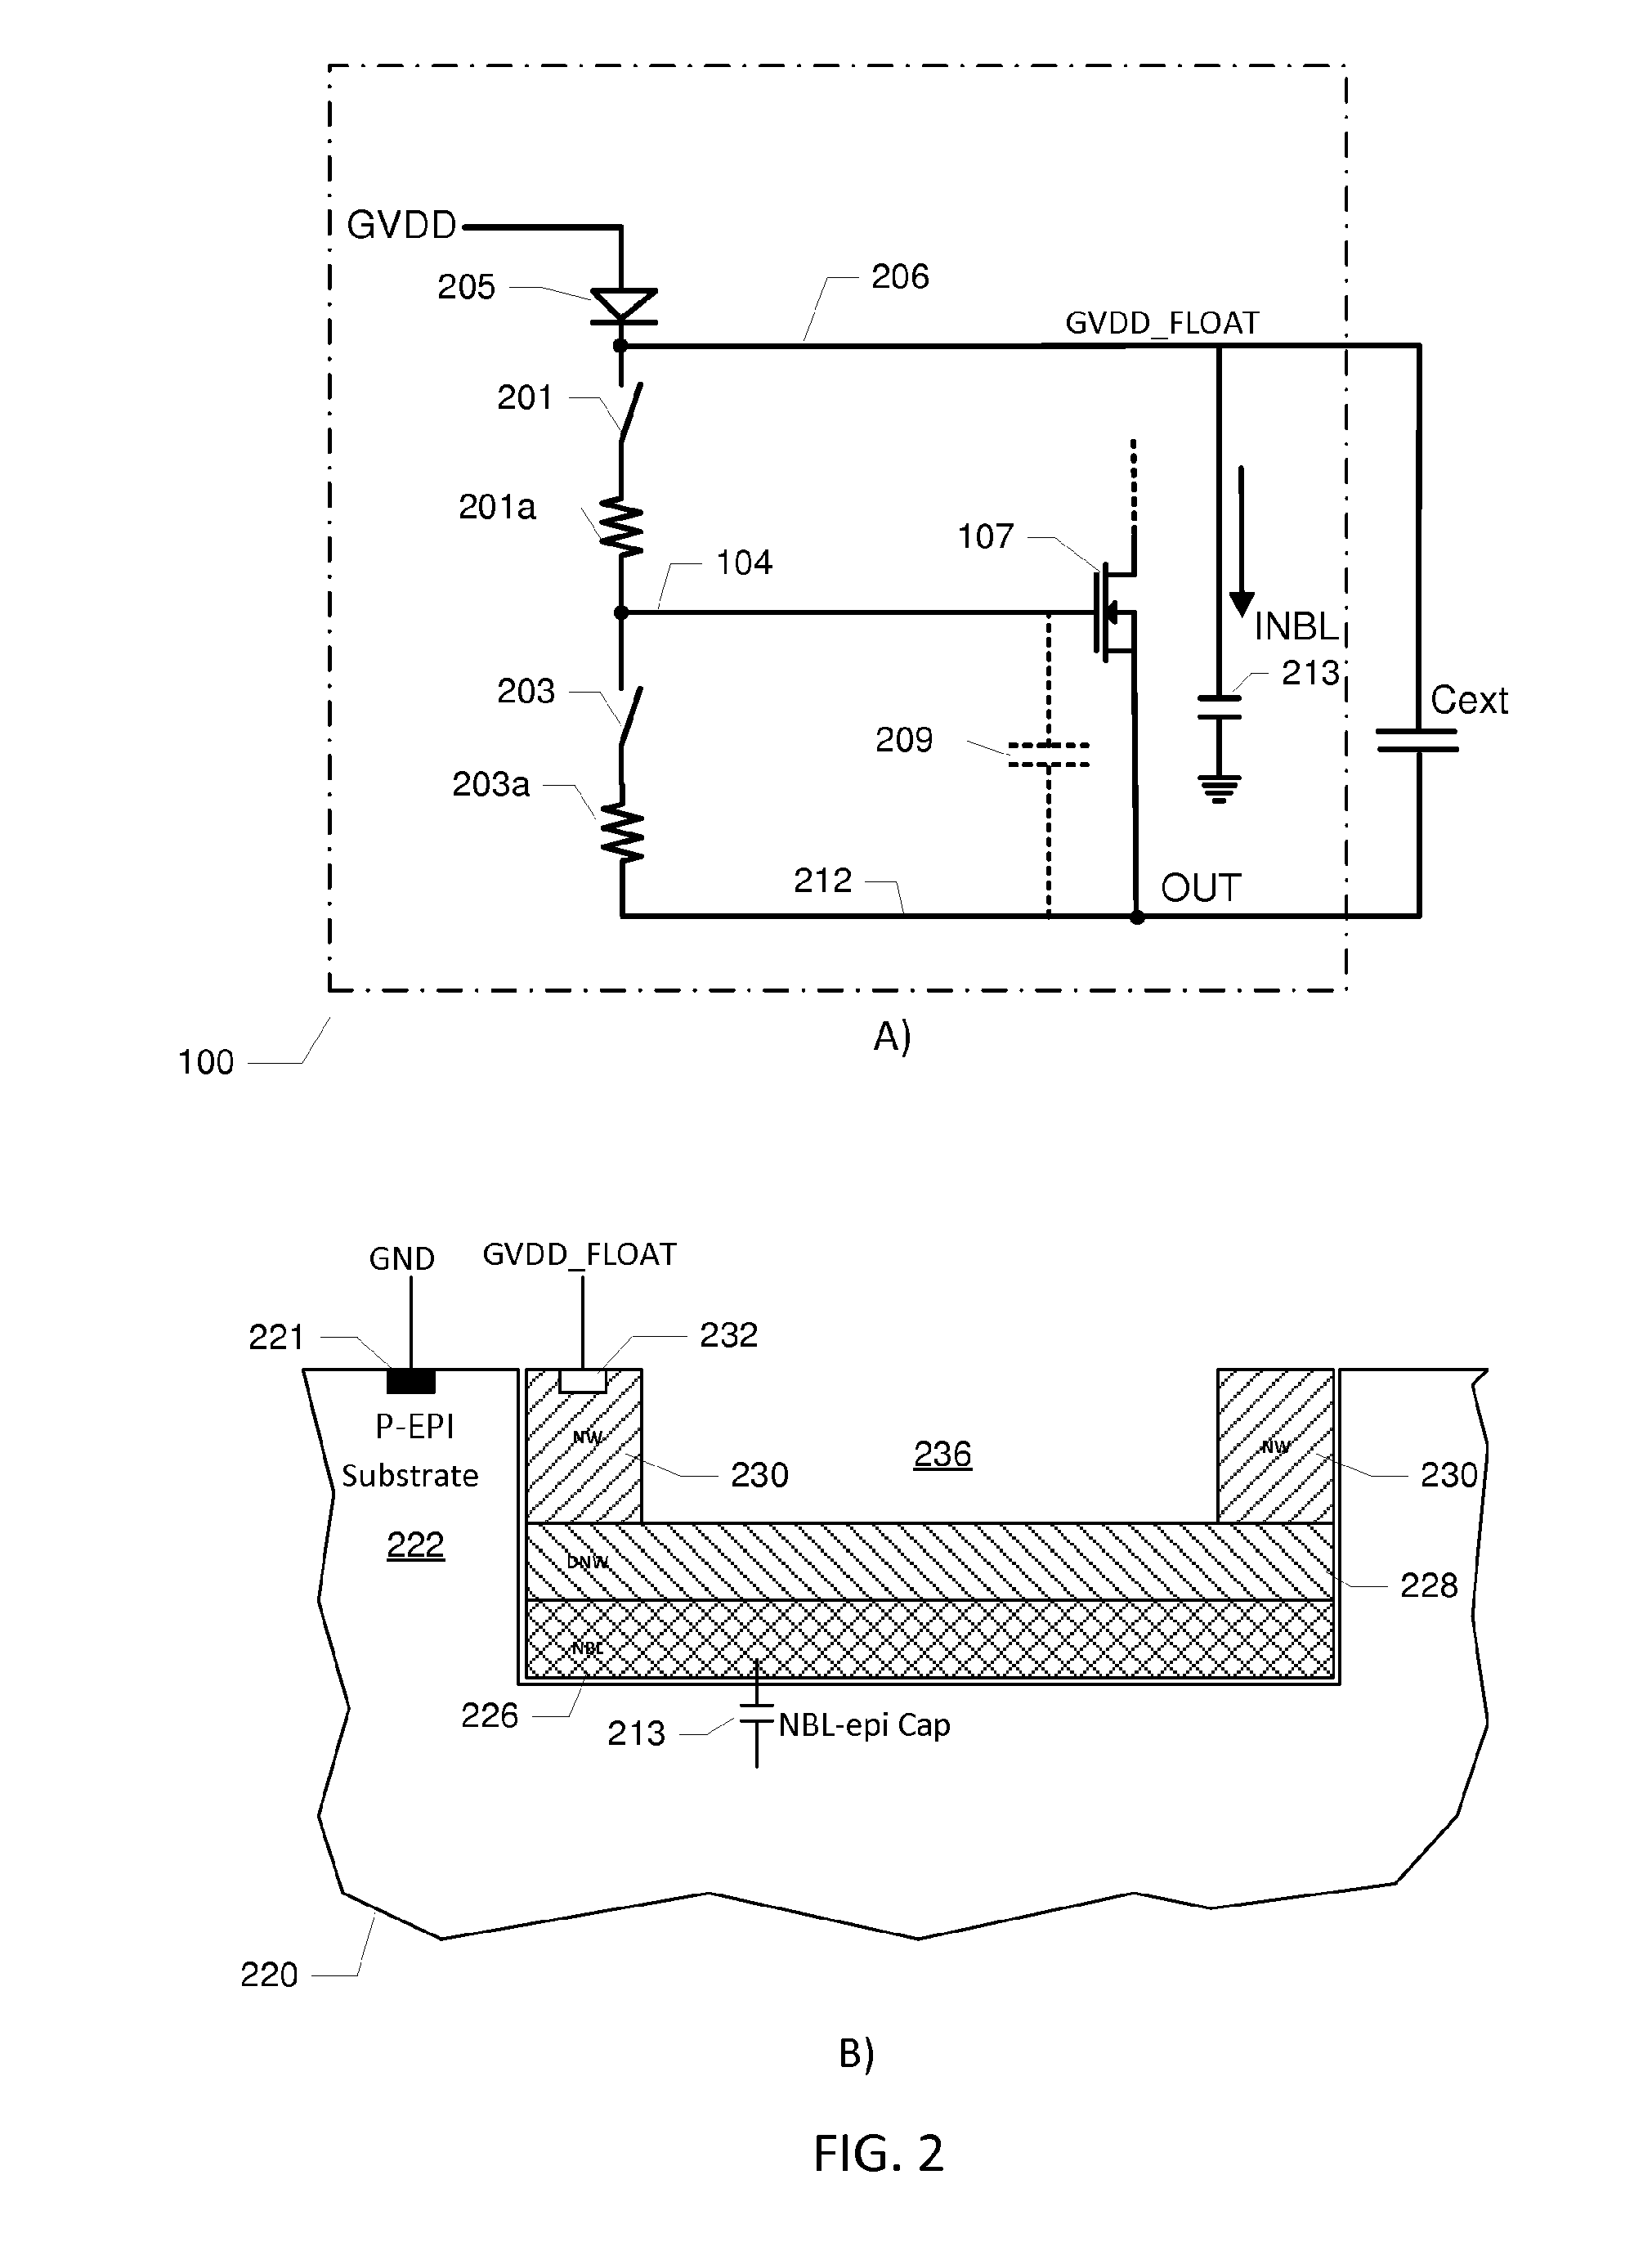 Integrated high side gate driver structure and circuit for driving high side power transistors